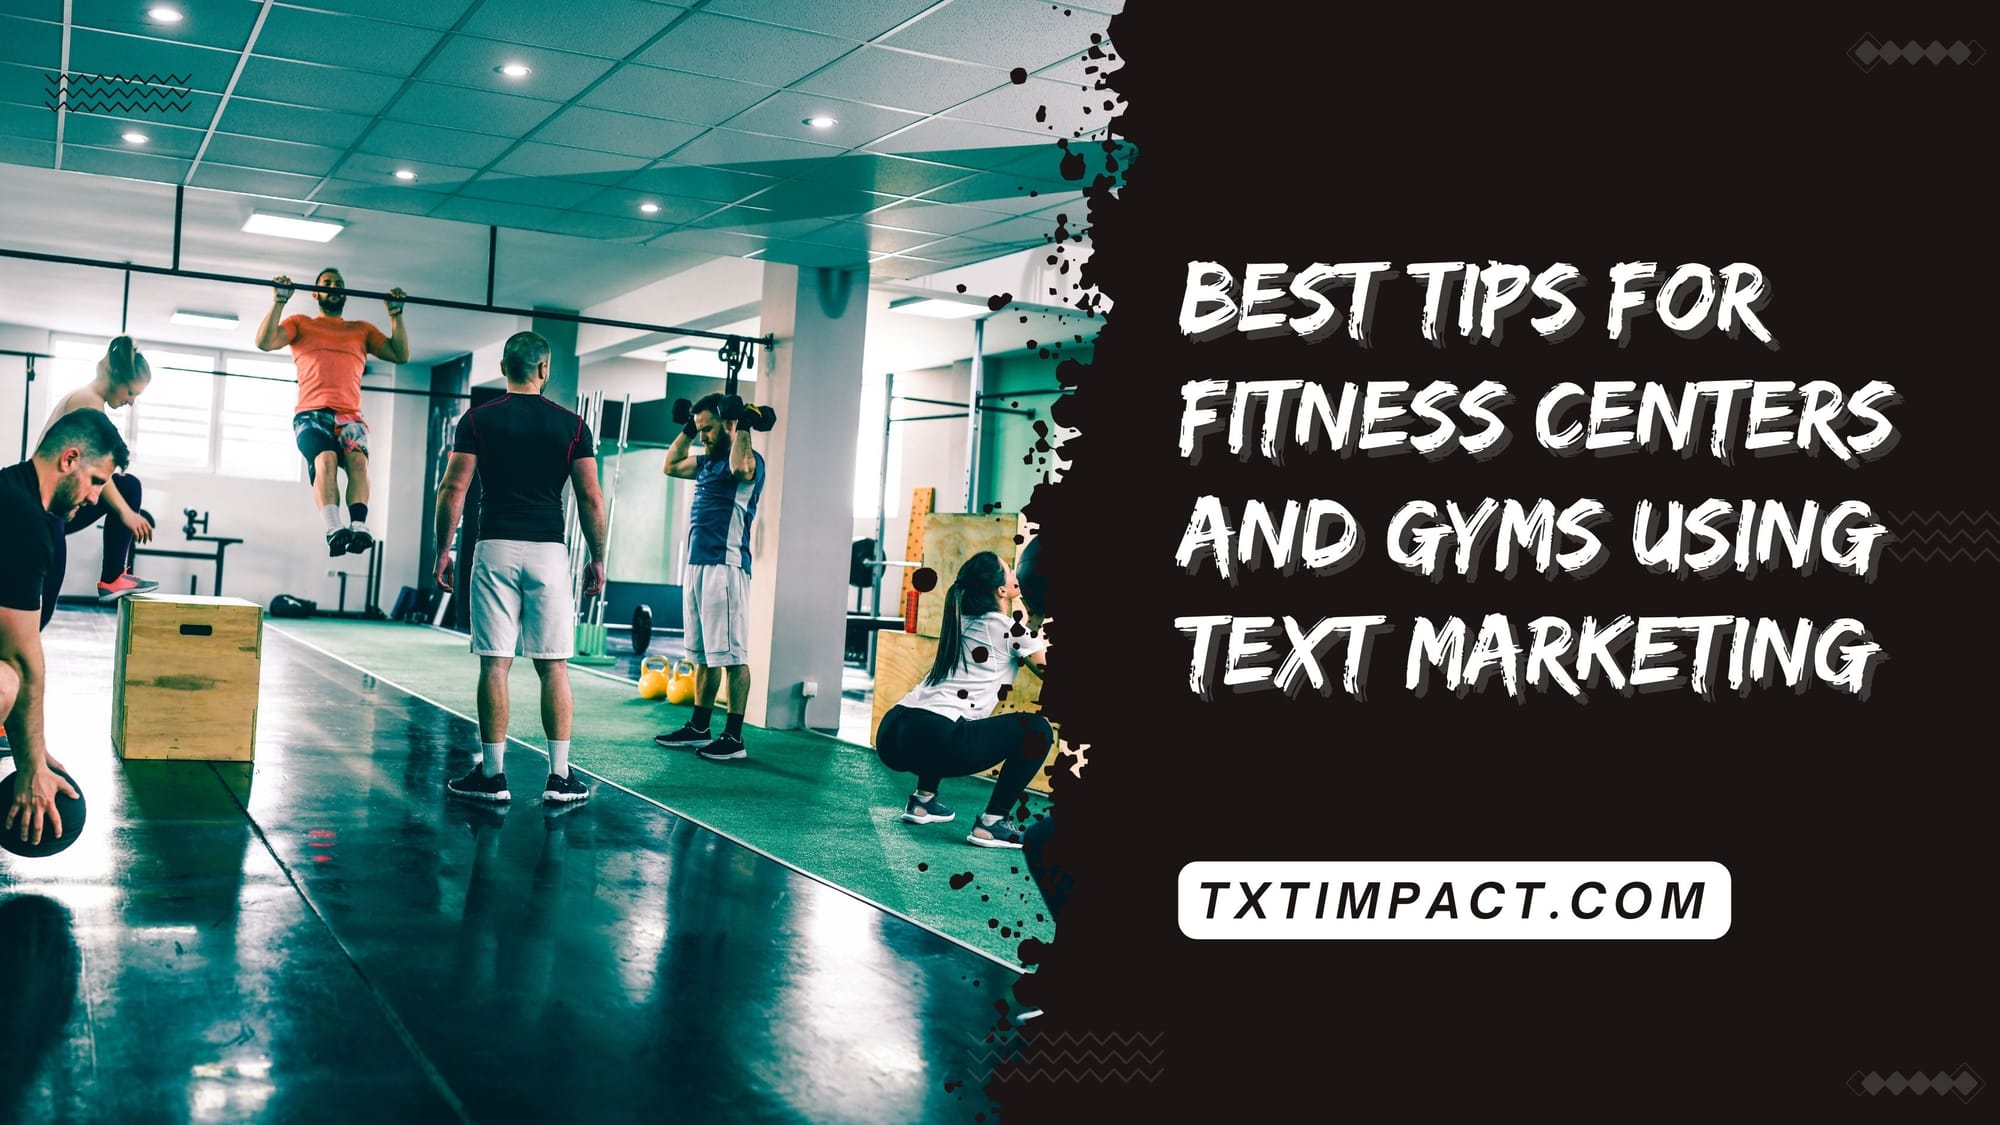 Best Tips for Fitness Centers and Gyms Using Text Marketing.jpg